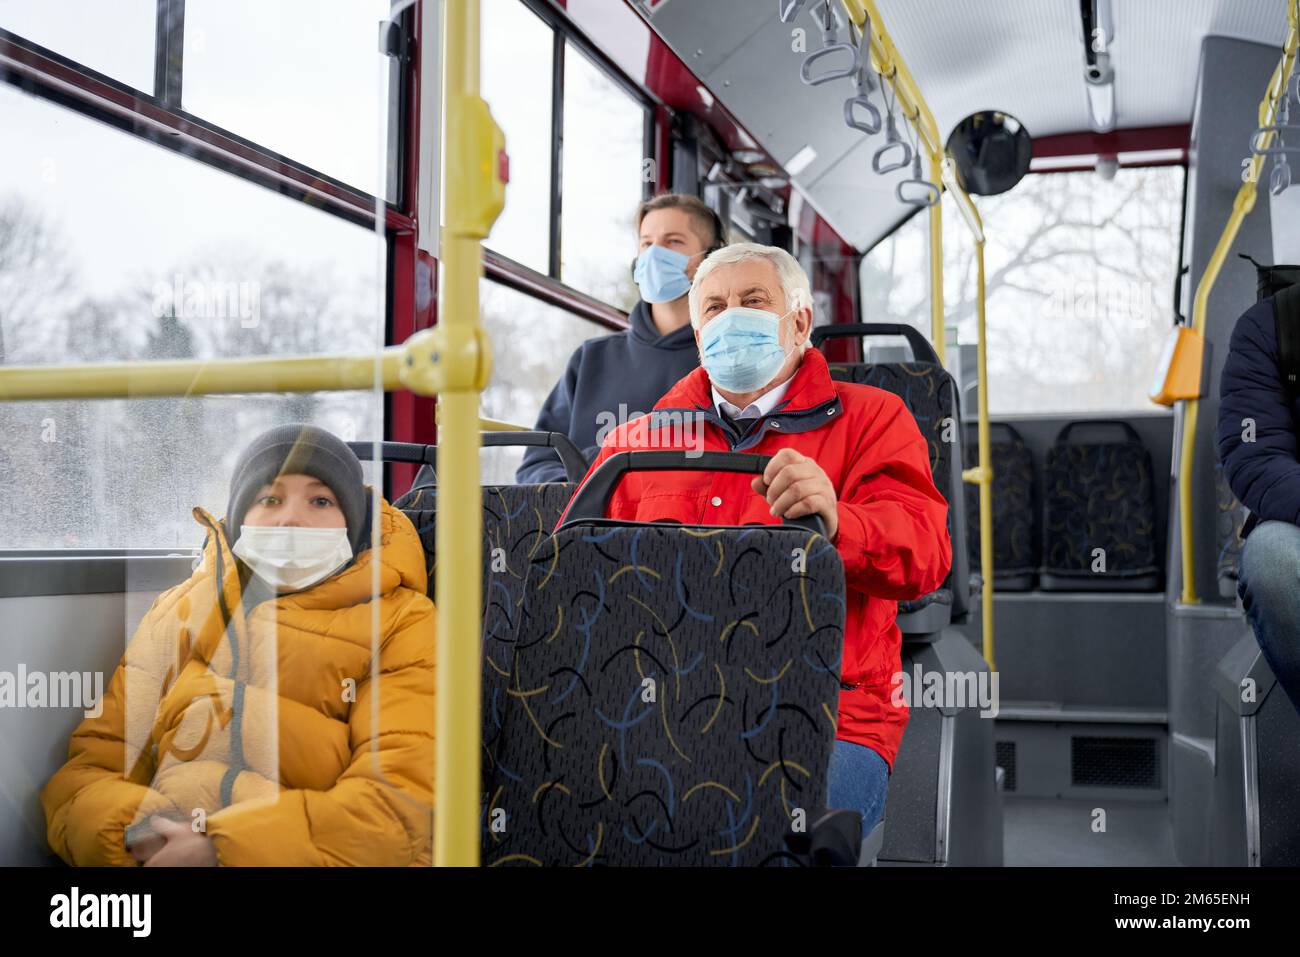 Front view of passengers sitting on bus, wearing medical masks, protecting from global pandemic. People traveling by public transport, looking forward Stock Photo